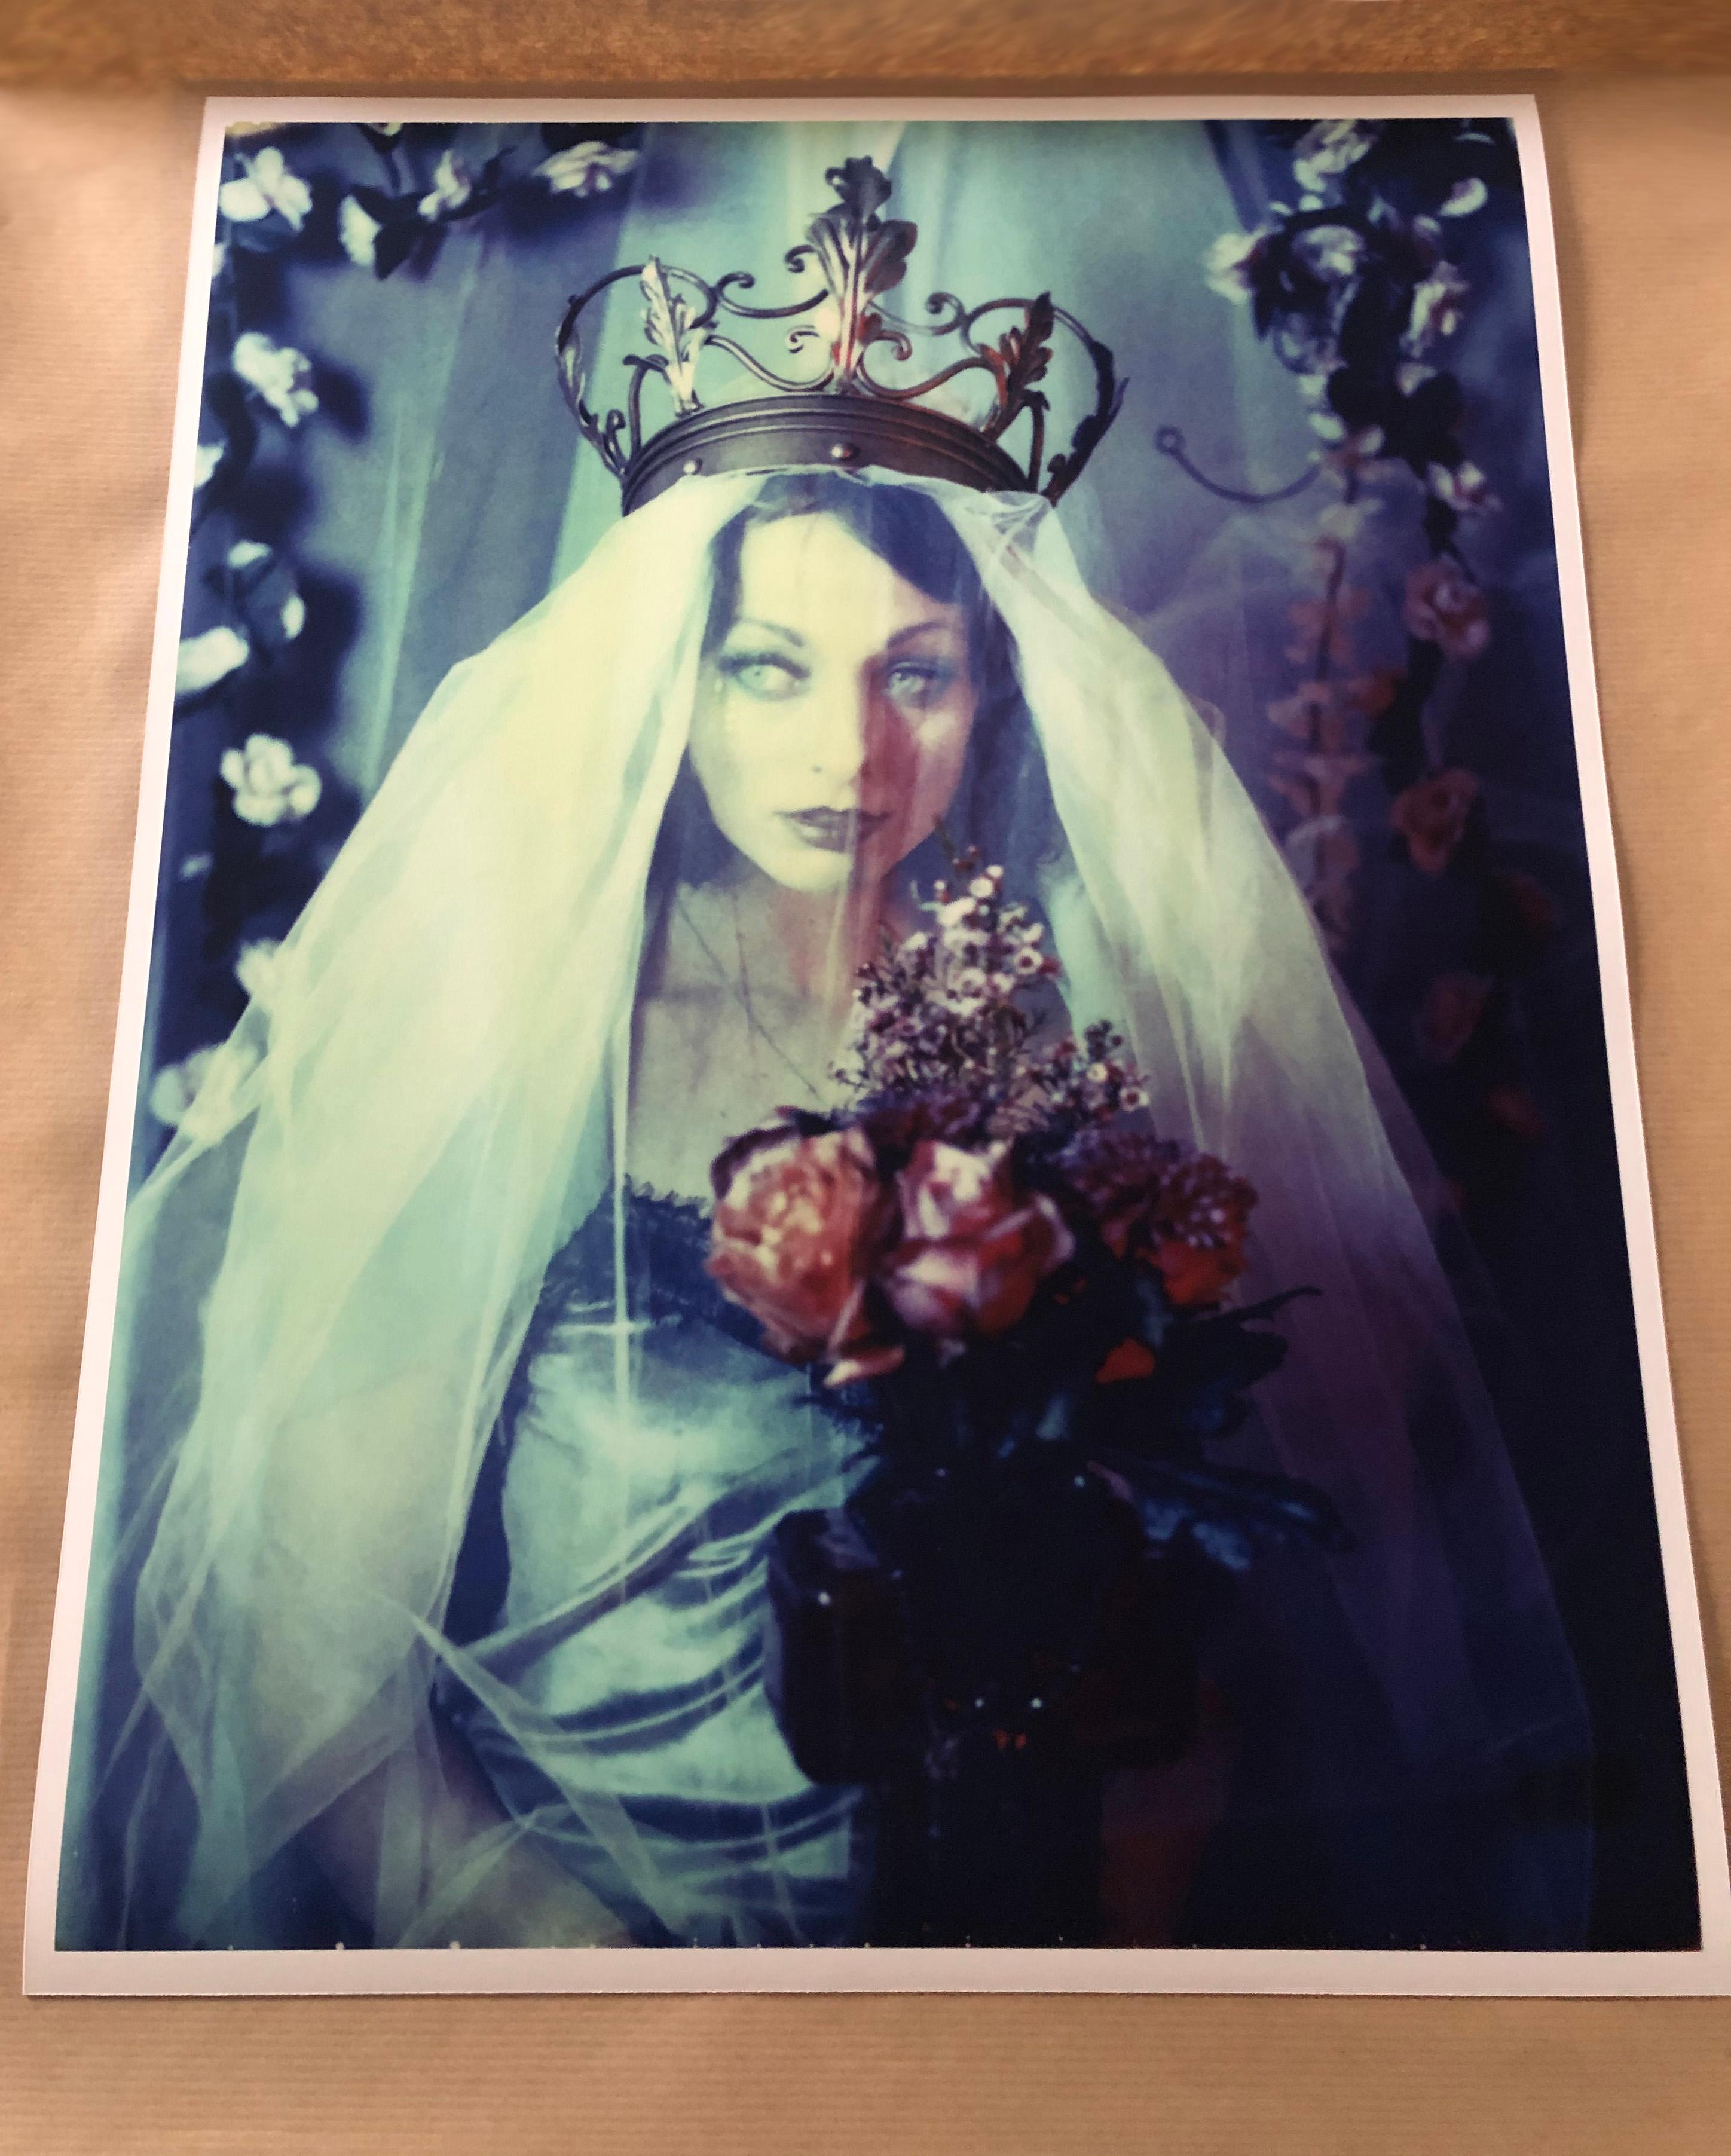 The Chaste Madonna [From the series Fox Almighty] - Polaroid, Women, Color - Photograph by Carmen de Vos